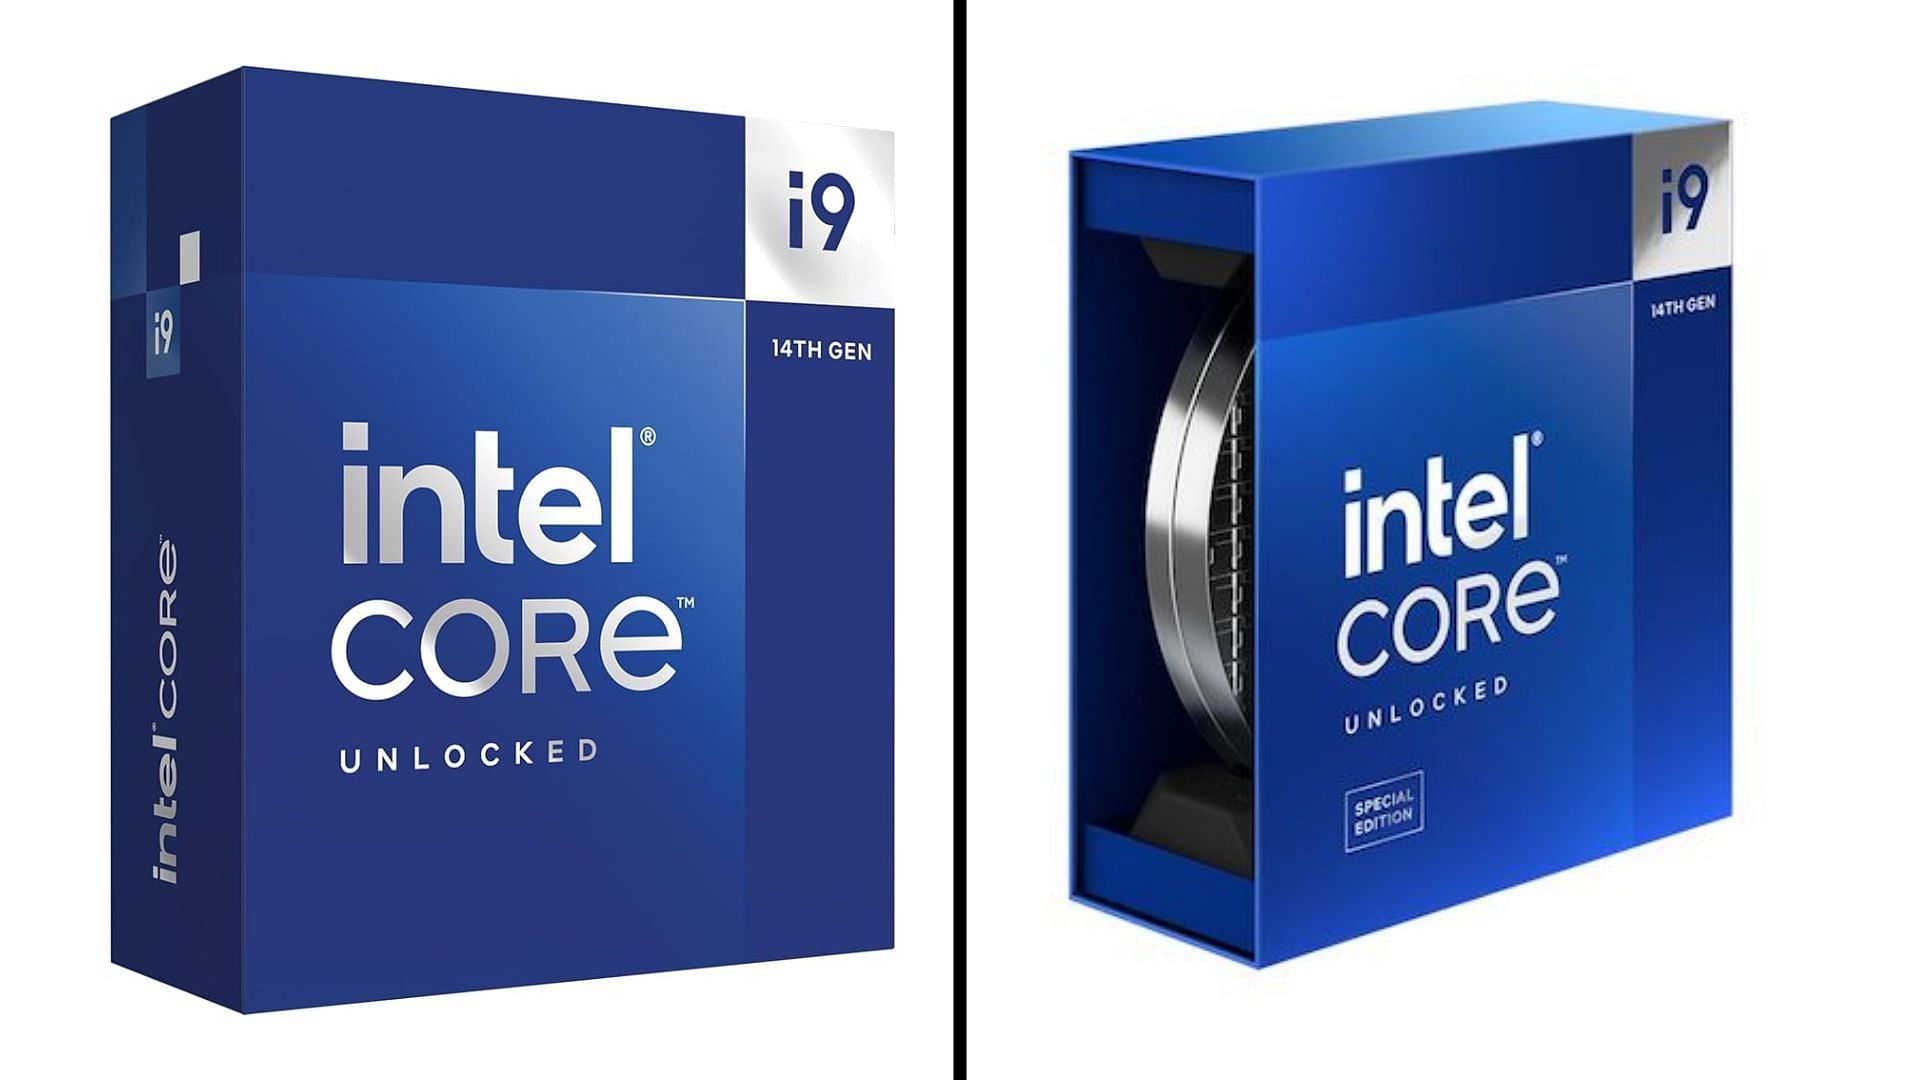 The Intel Core i9-14900K and i9-14900KS are some of the most powerful chips today (Image via Intel and Amazon)